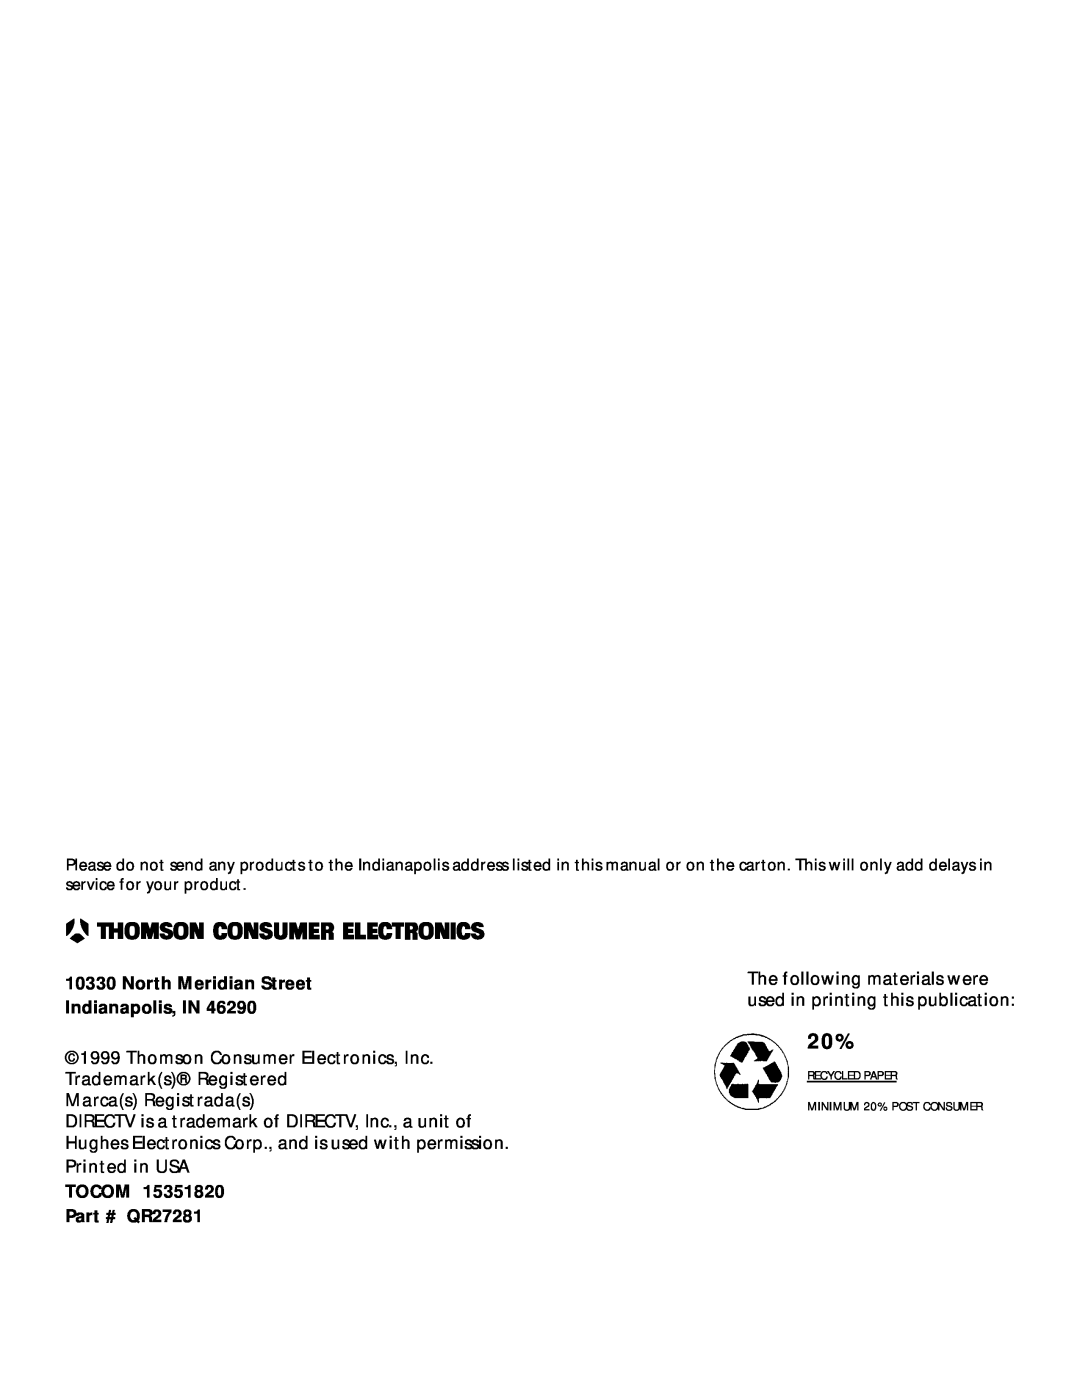 DirecTV HDTV user manual Recycled Paper, North Meridian Street Indianapolis, IN, TOCOM QR27281 